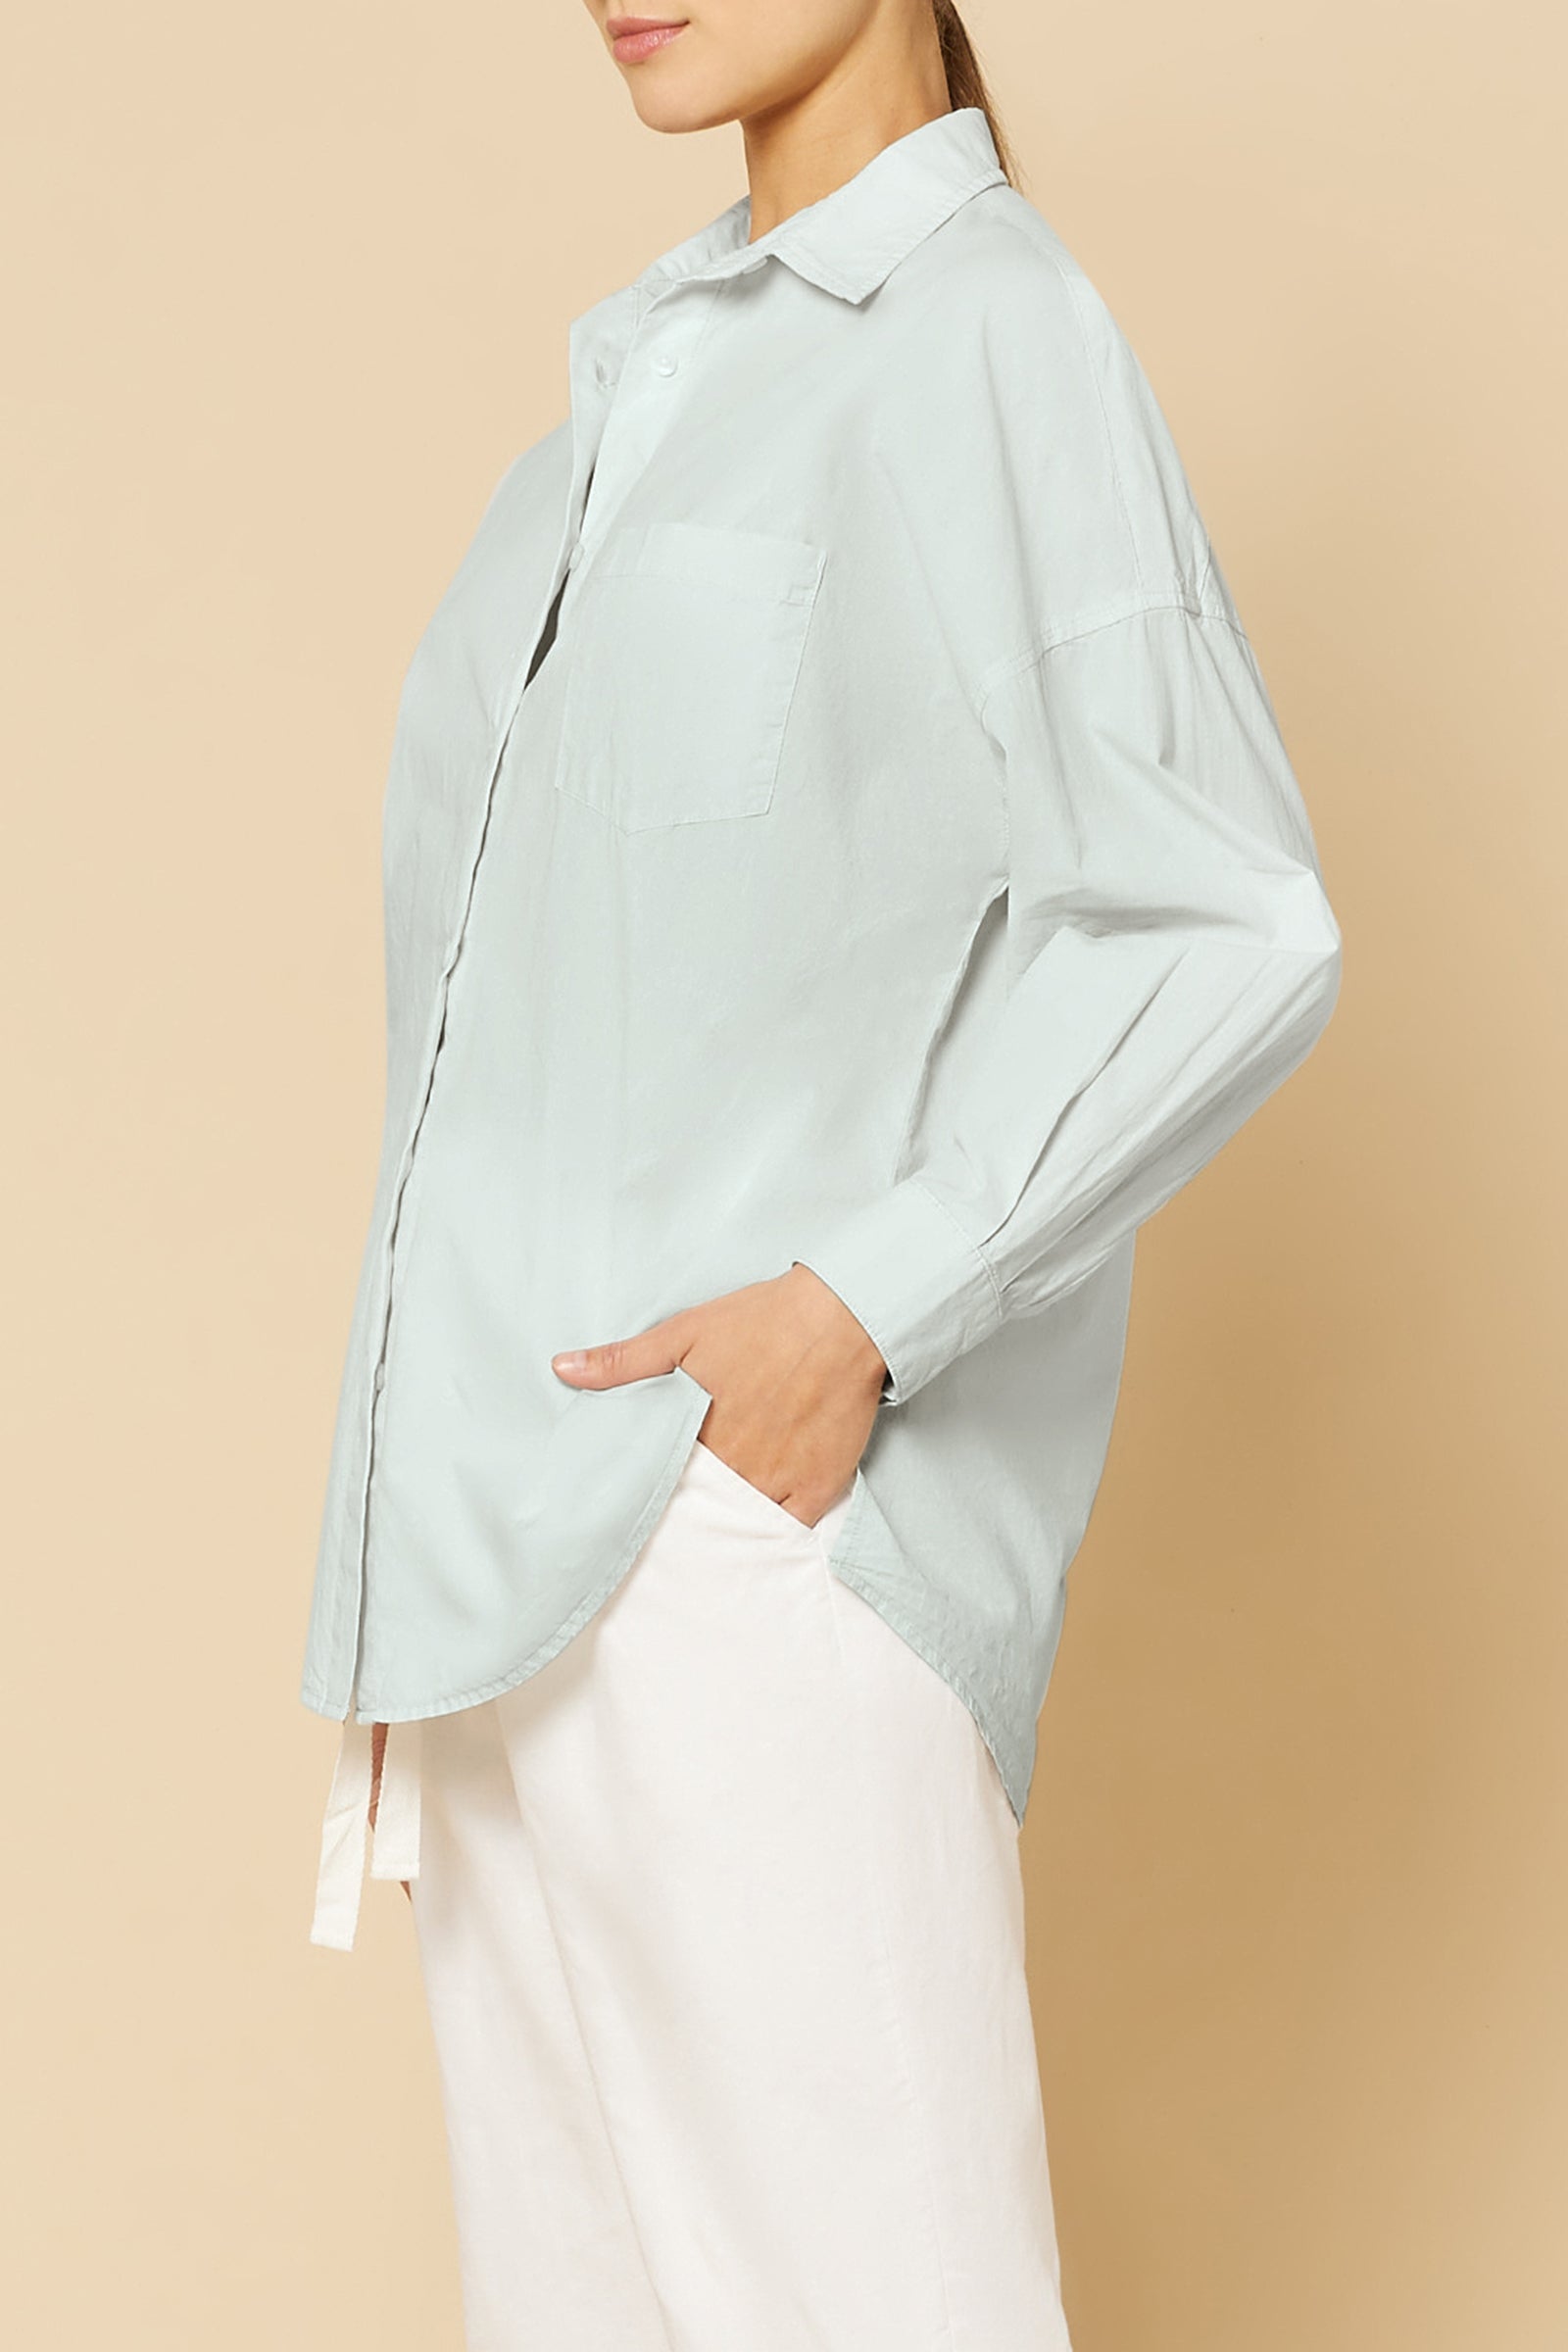 Nude Lucy Naya Washed Cotton Shirt in a Ice White Colour